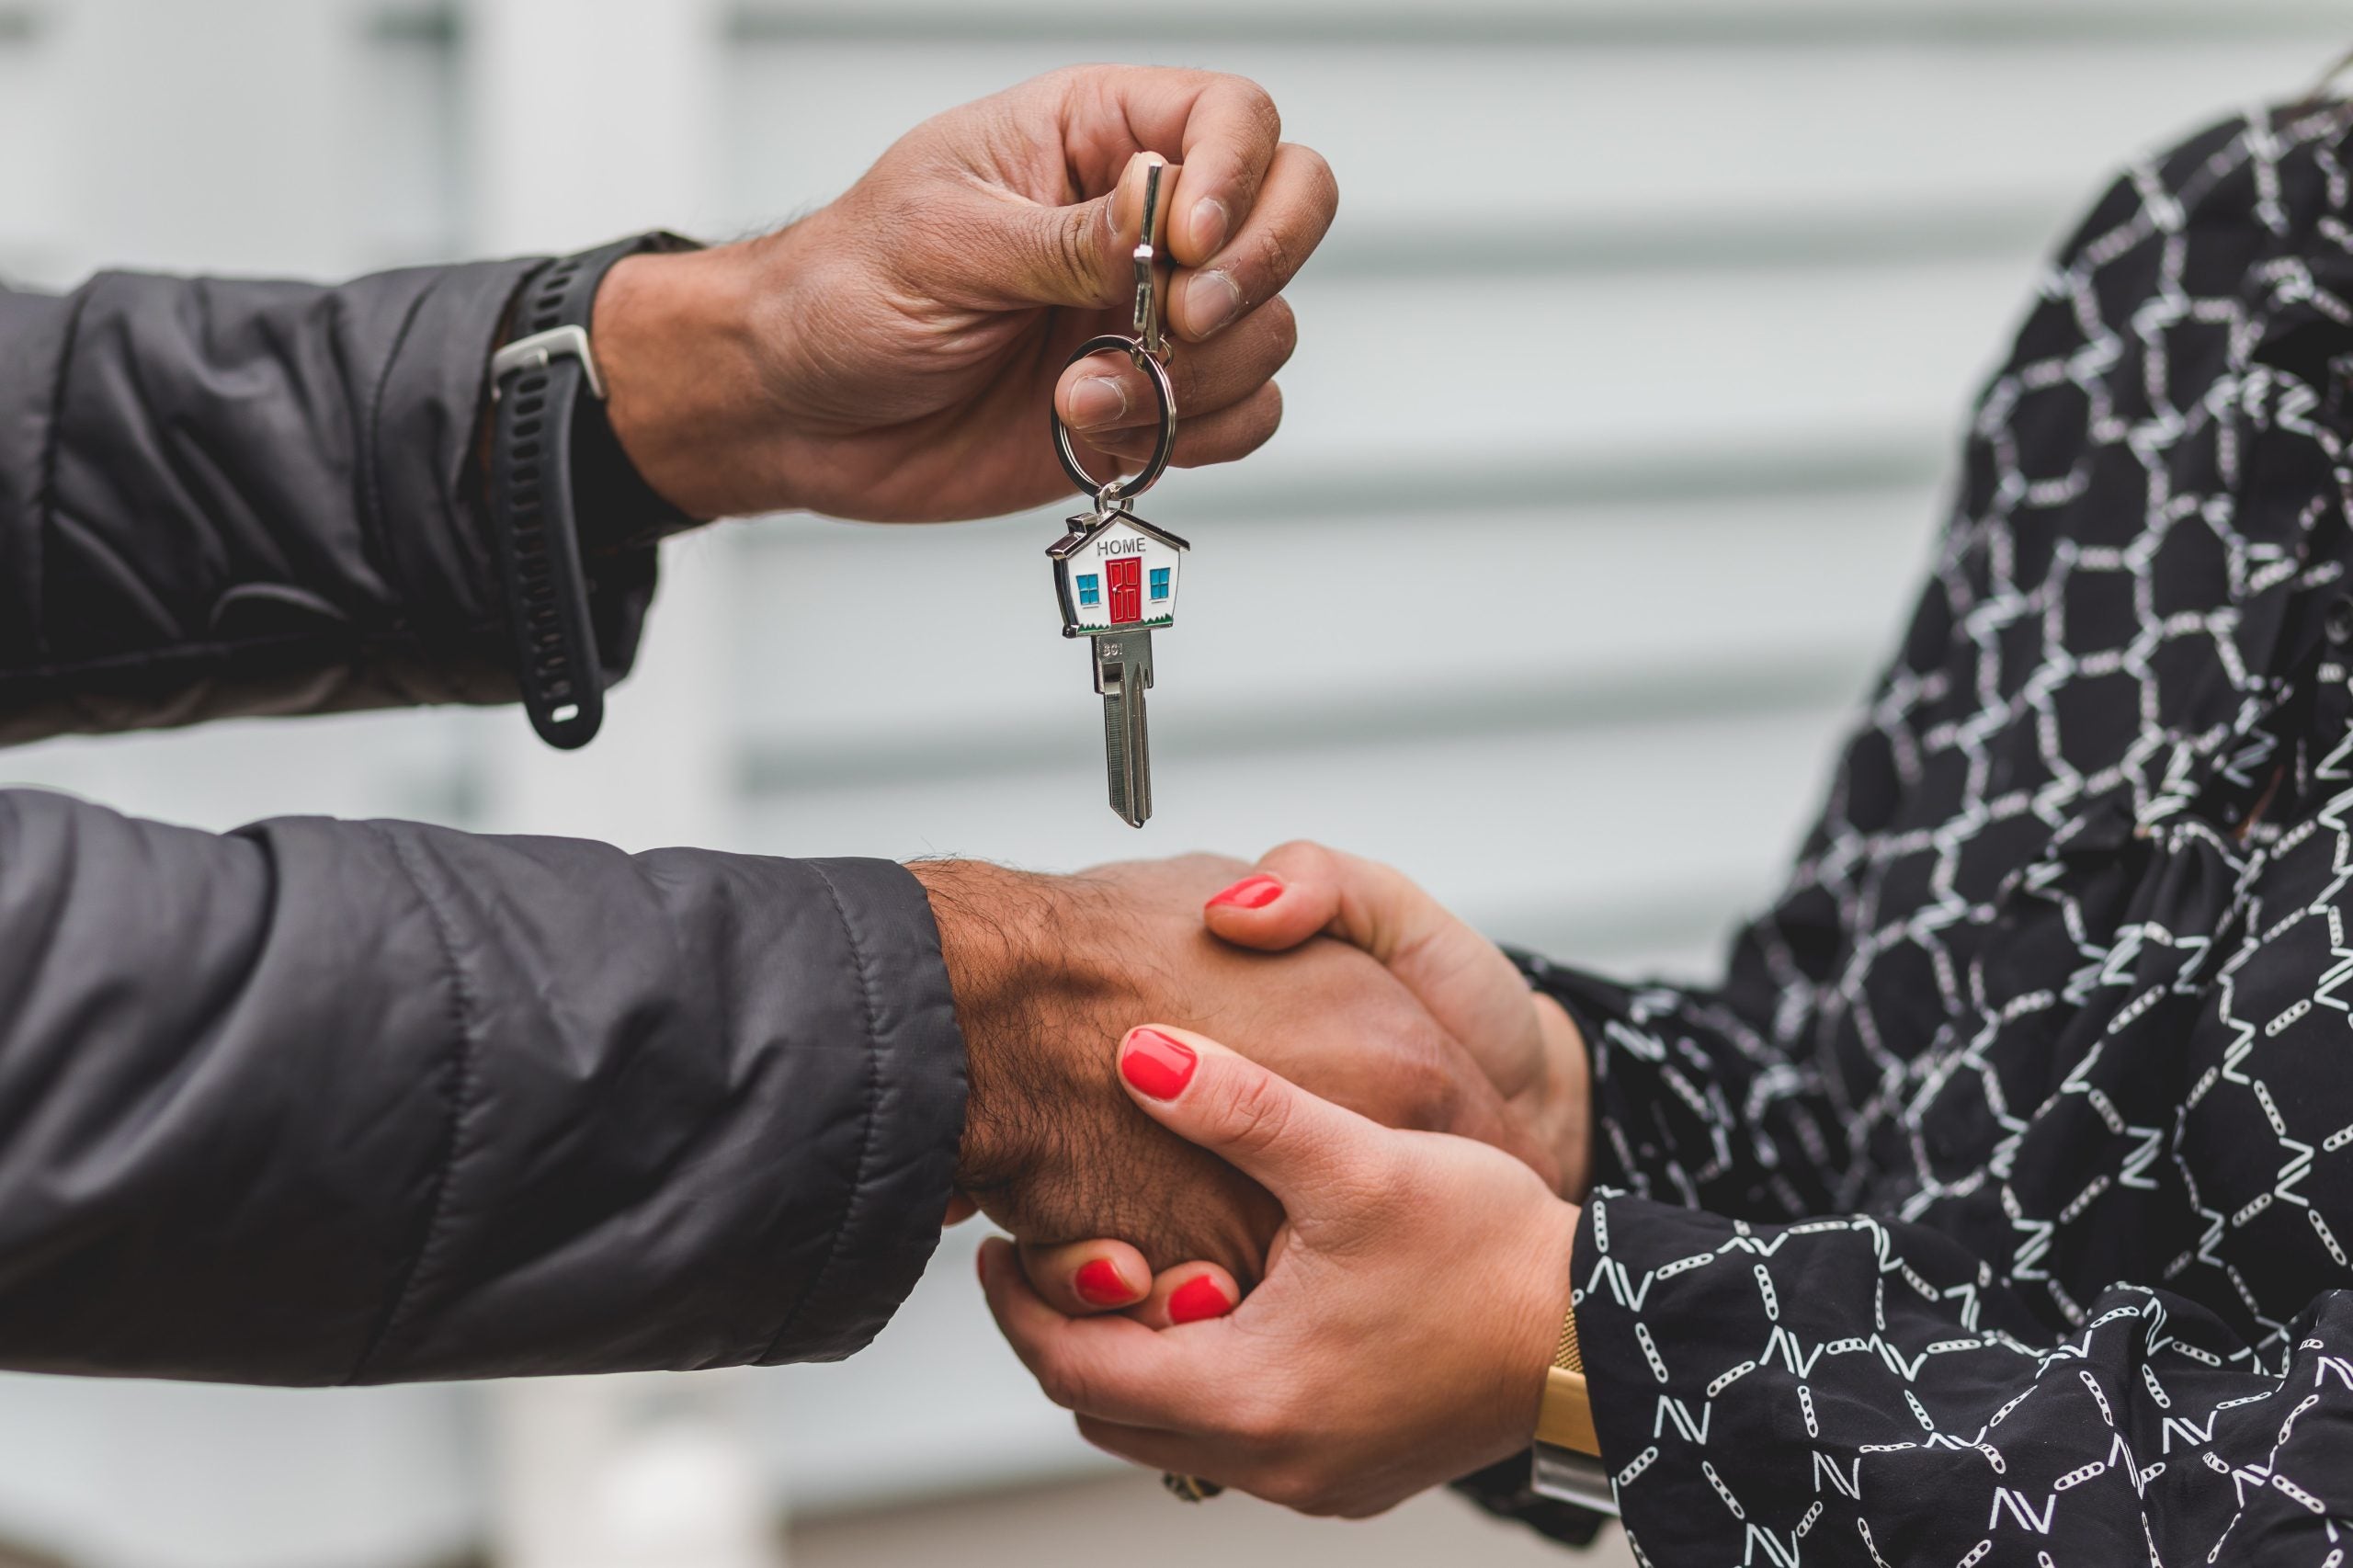 A New Mortgage Loan Has Just Been Launched And It's Specifically For Black Borrowers. Here's What We Know.